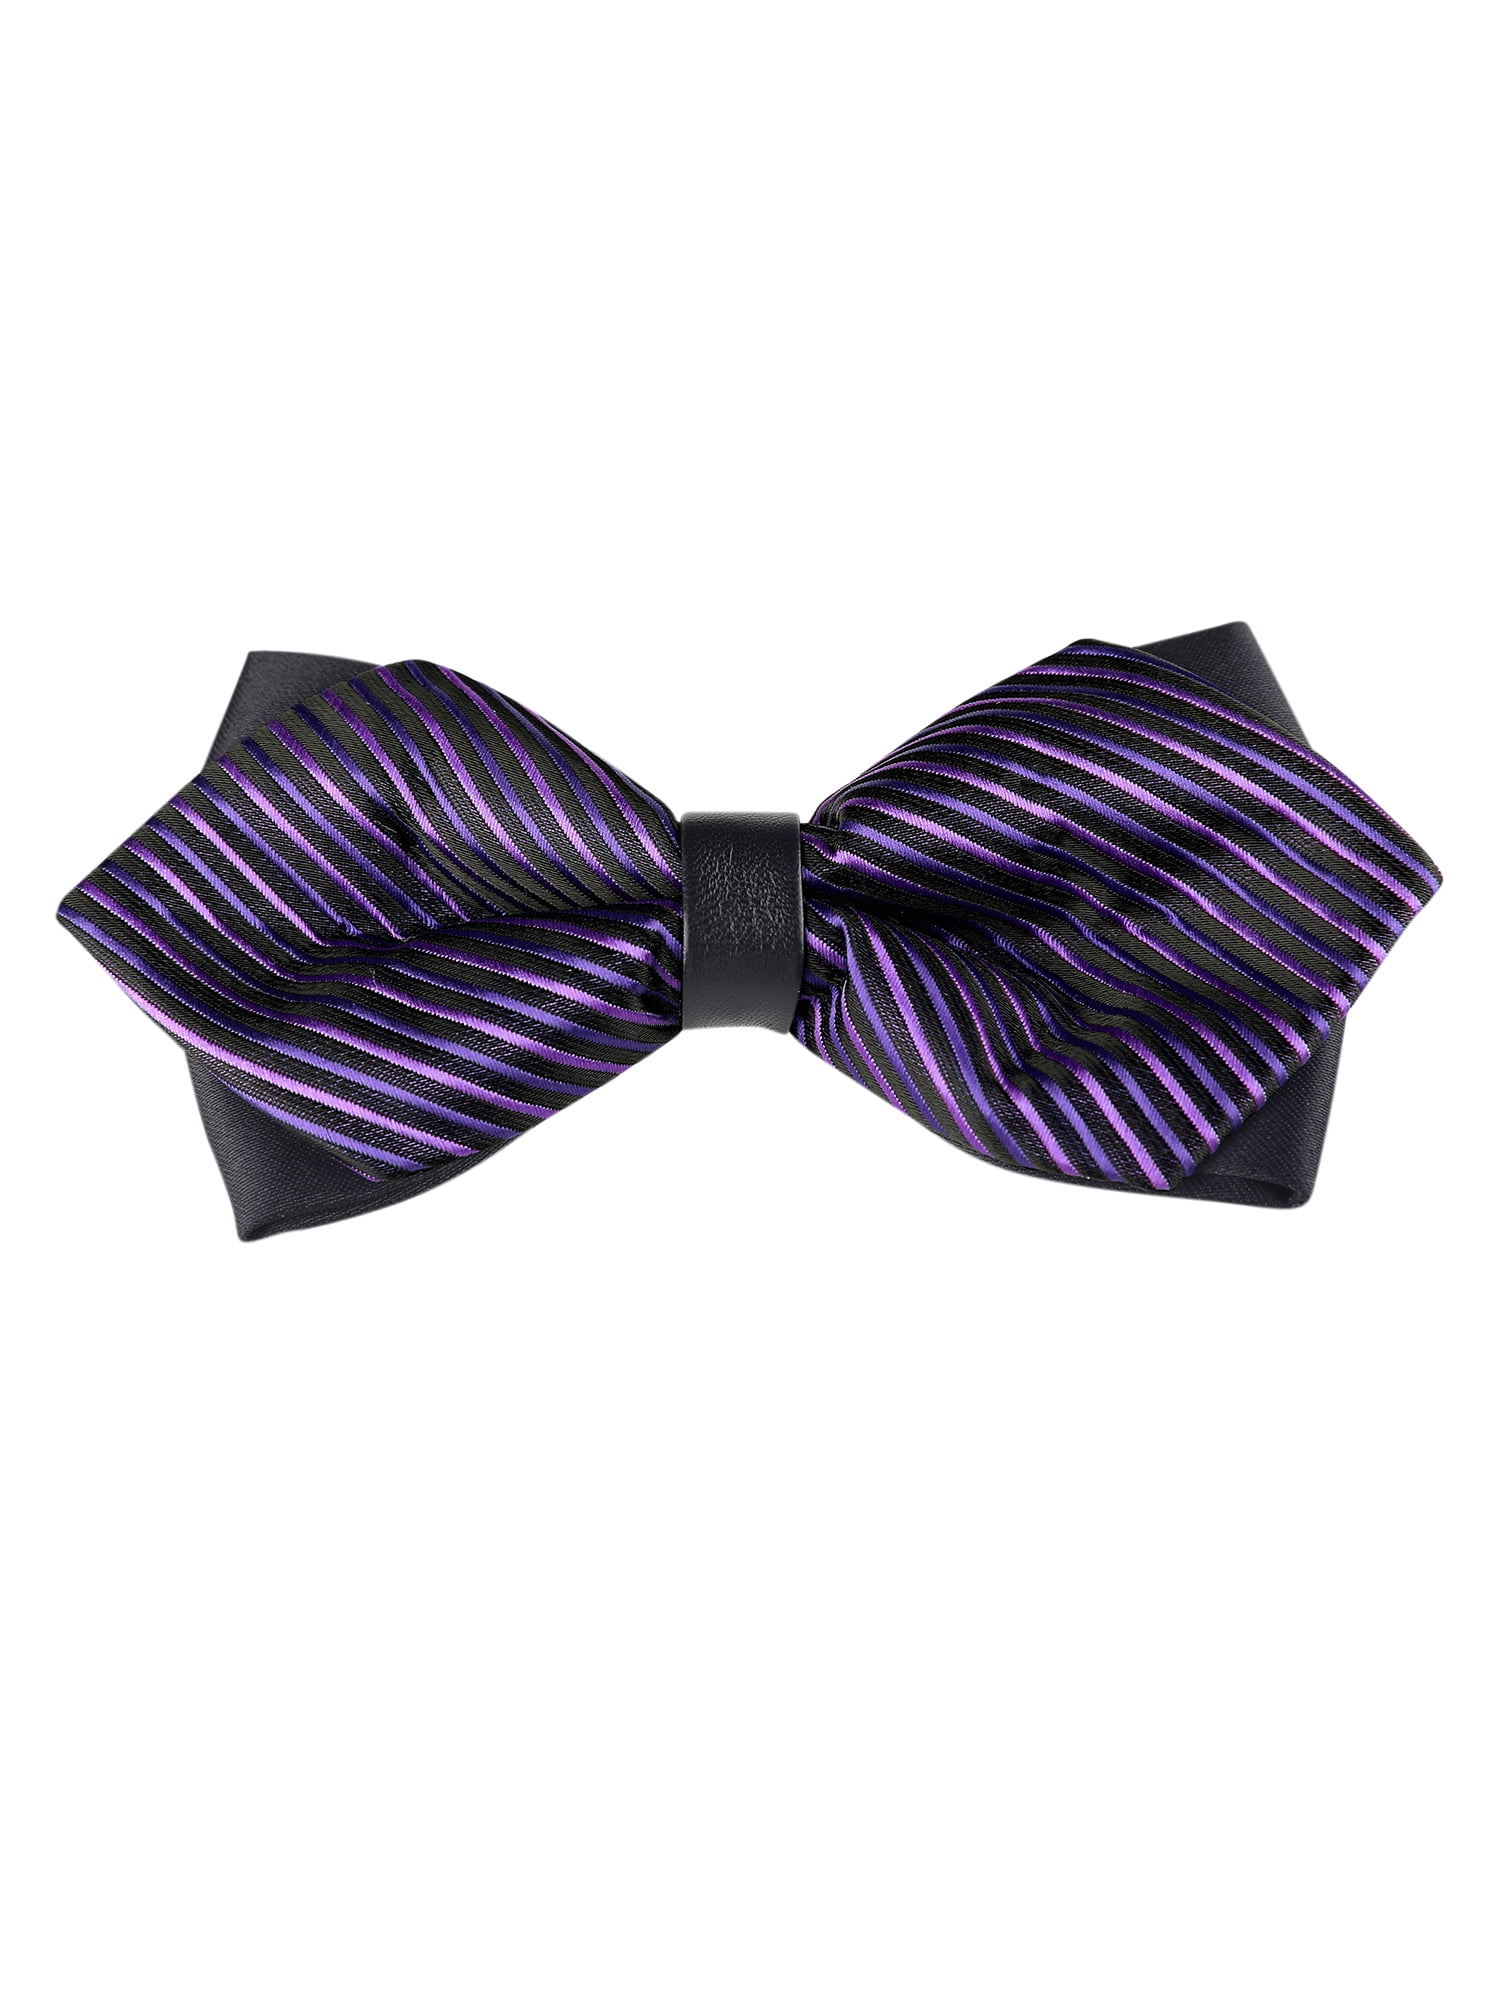 New formal men's pre tied Bow tie stripes formal wedding party prom peach 